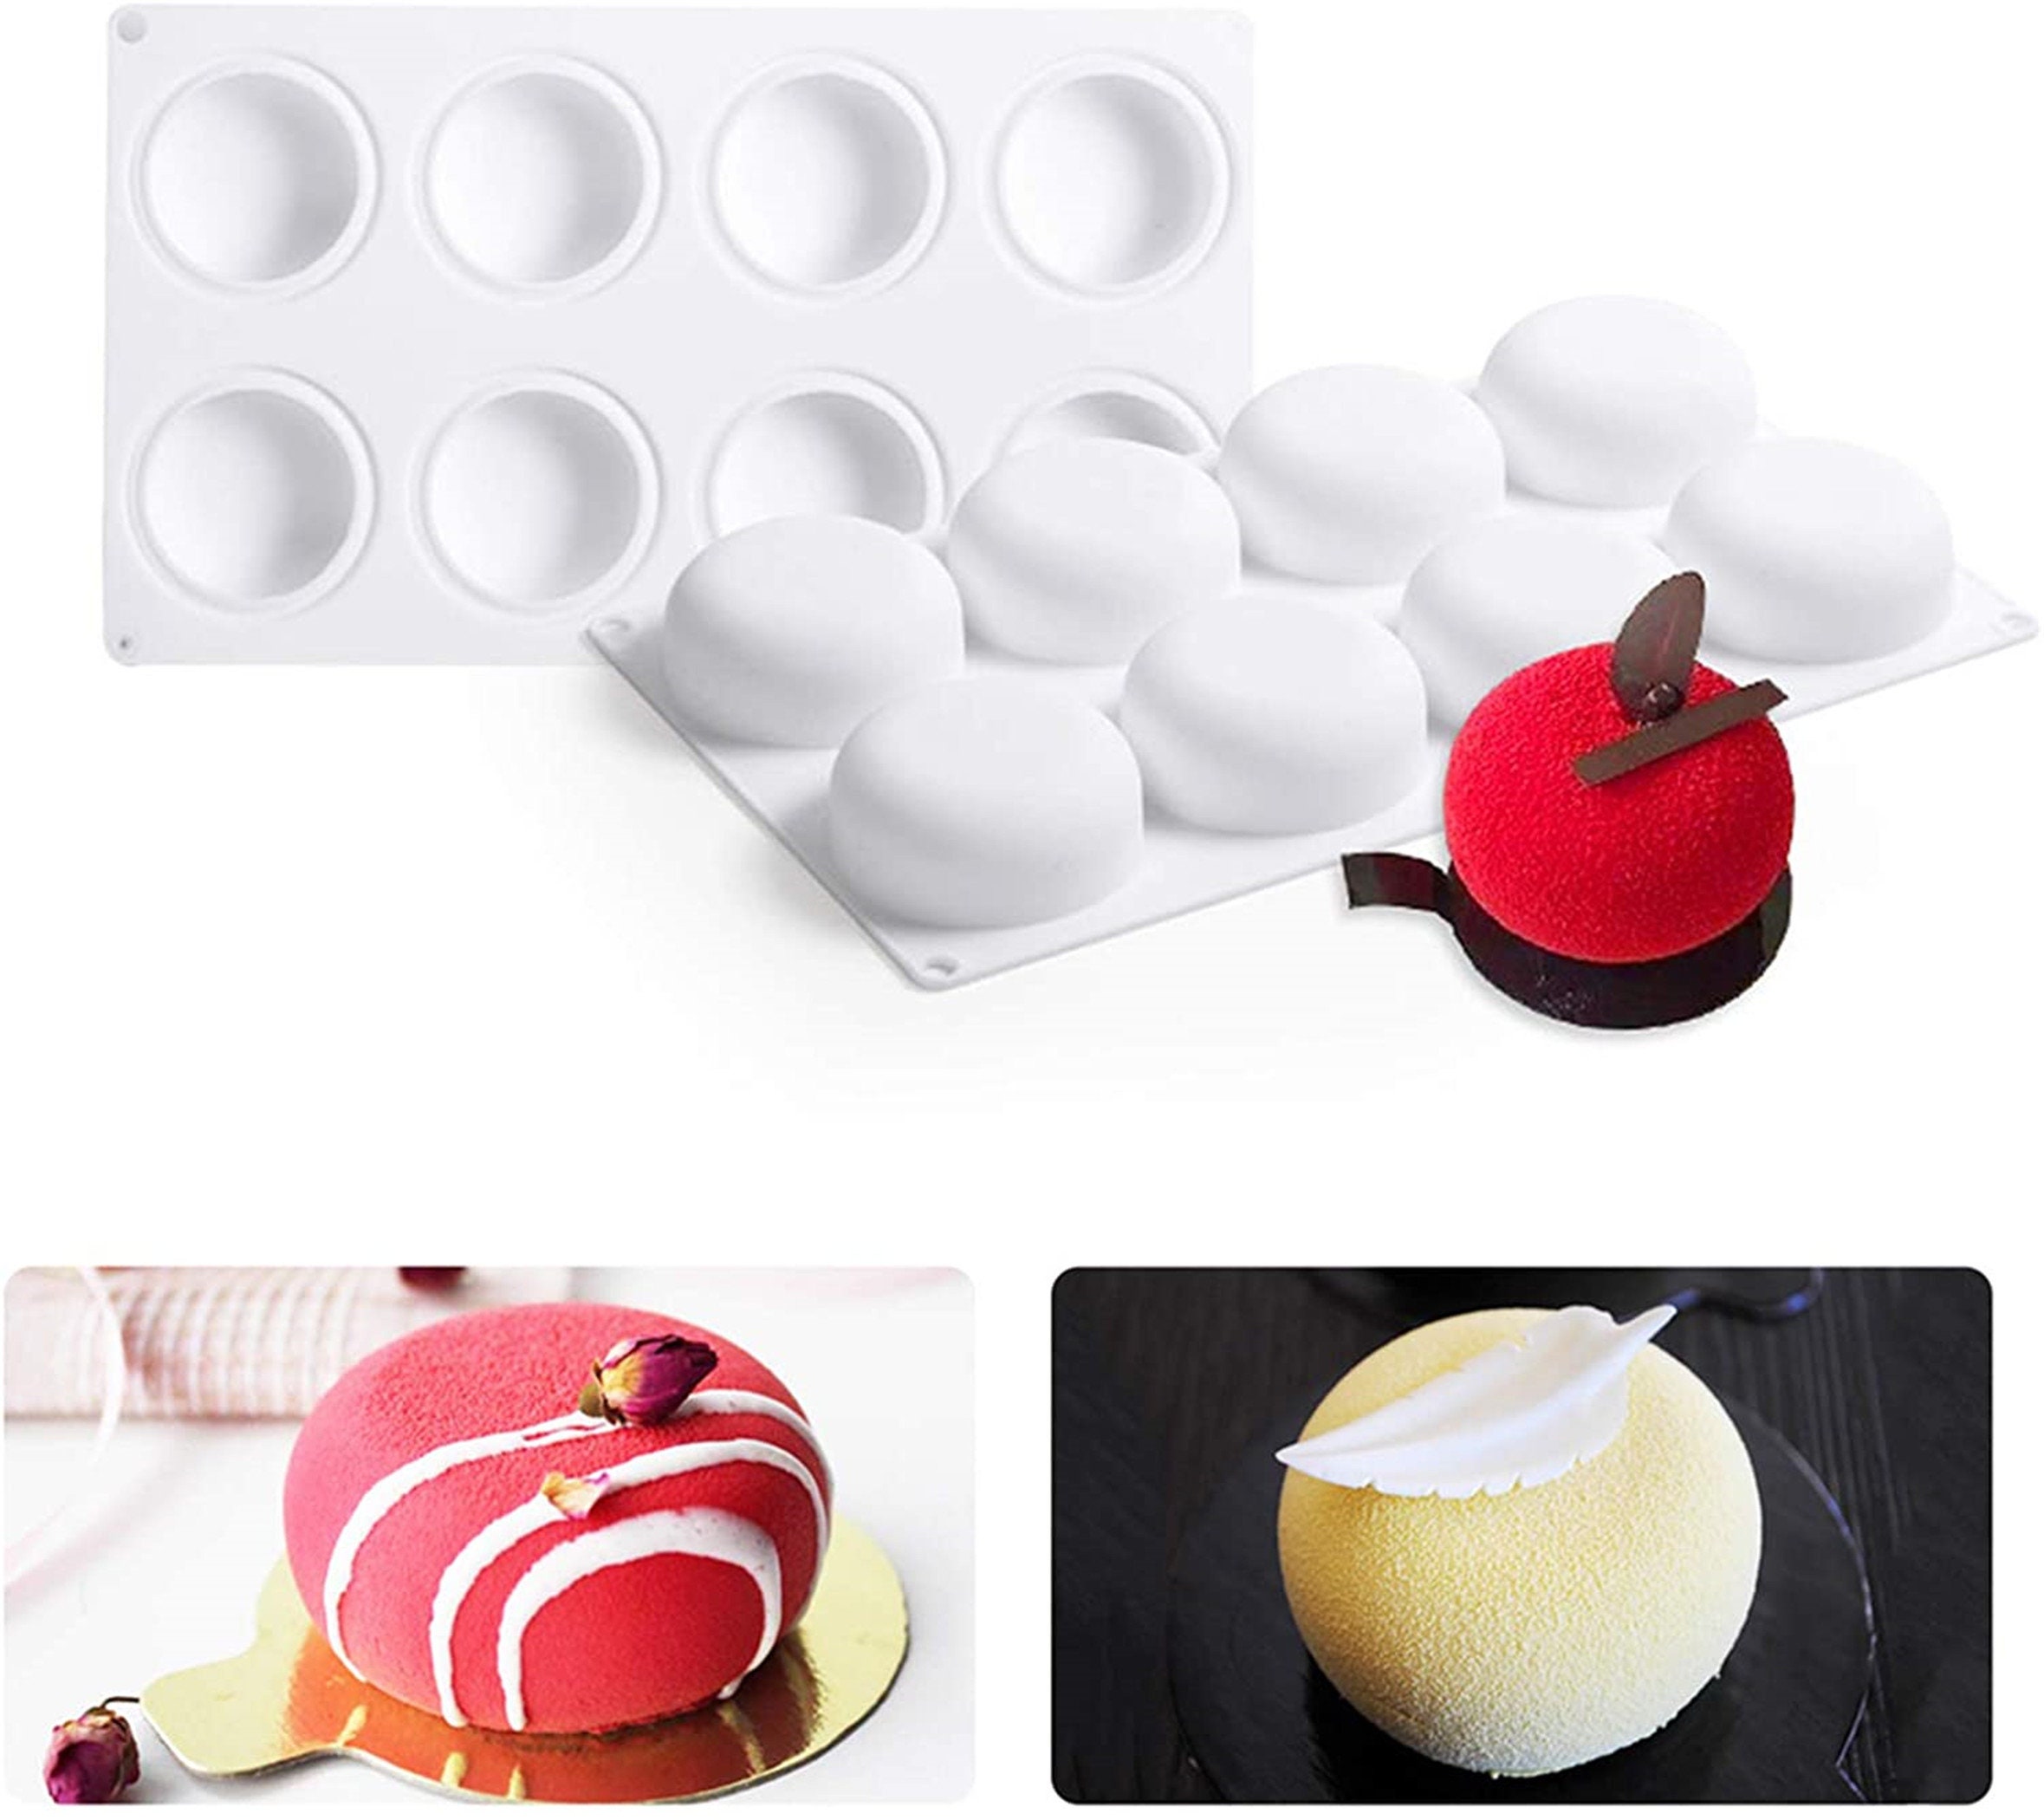 VIKROM 3D Maker Silicone Cake Molds - Round Silicone Ghana